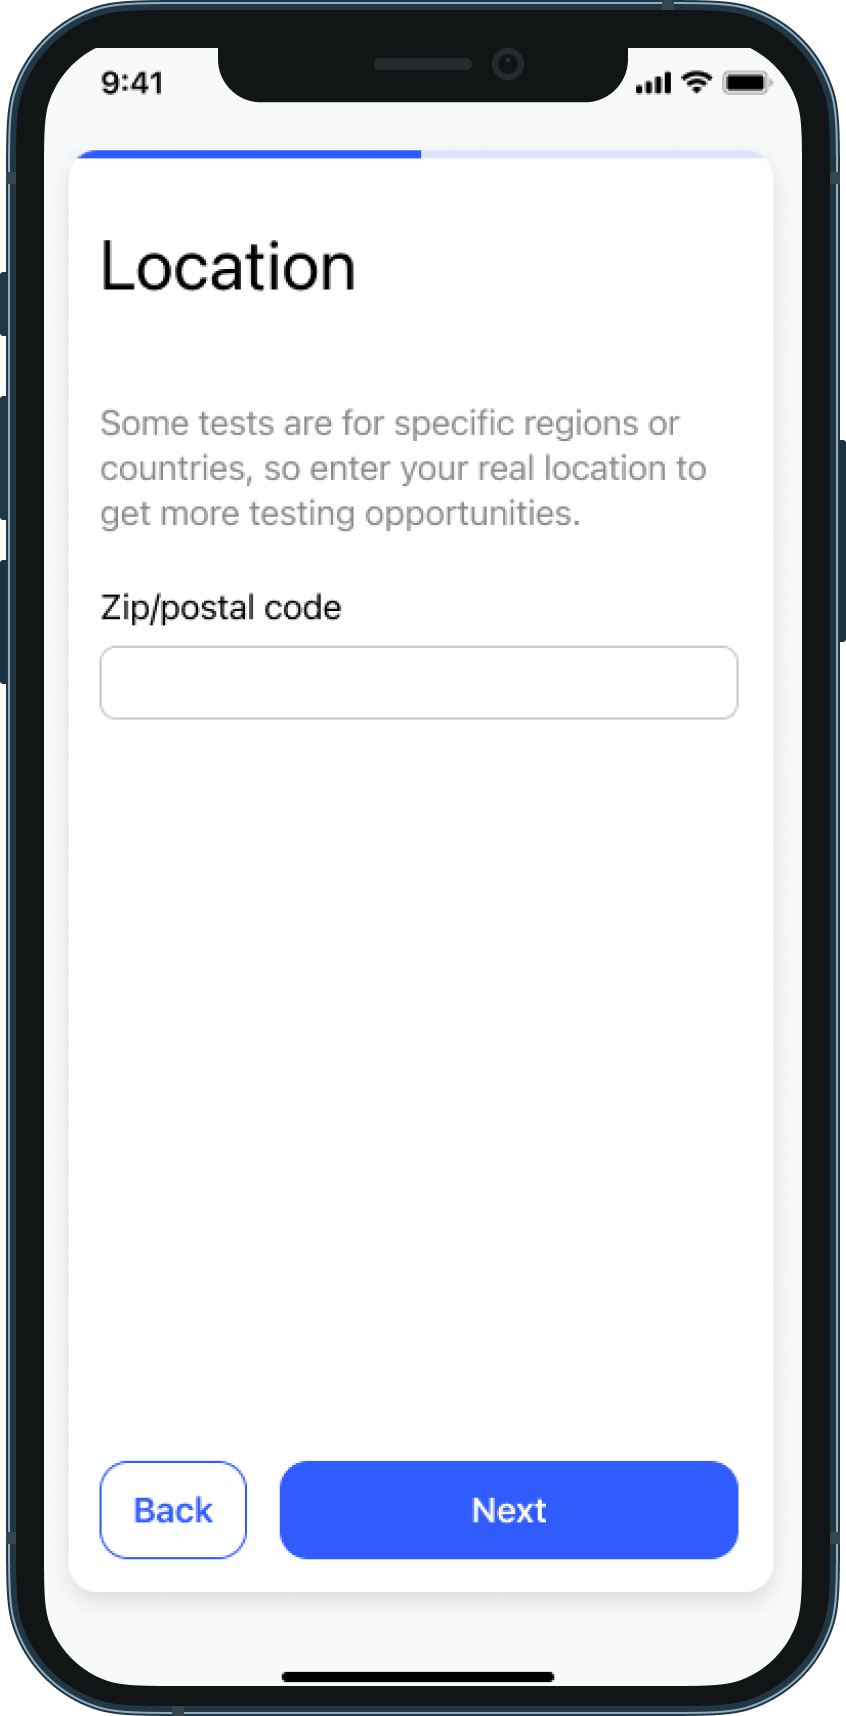 A screen that includes a field to provide a postal code.  A Next button allows the user to proceed to the next screen and a Back button allows the user to return to the previous screen.